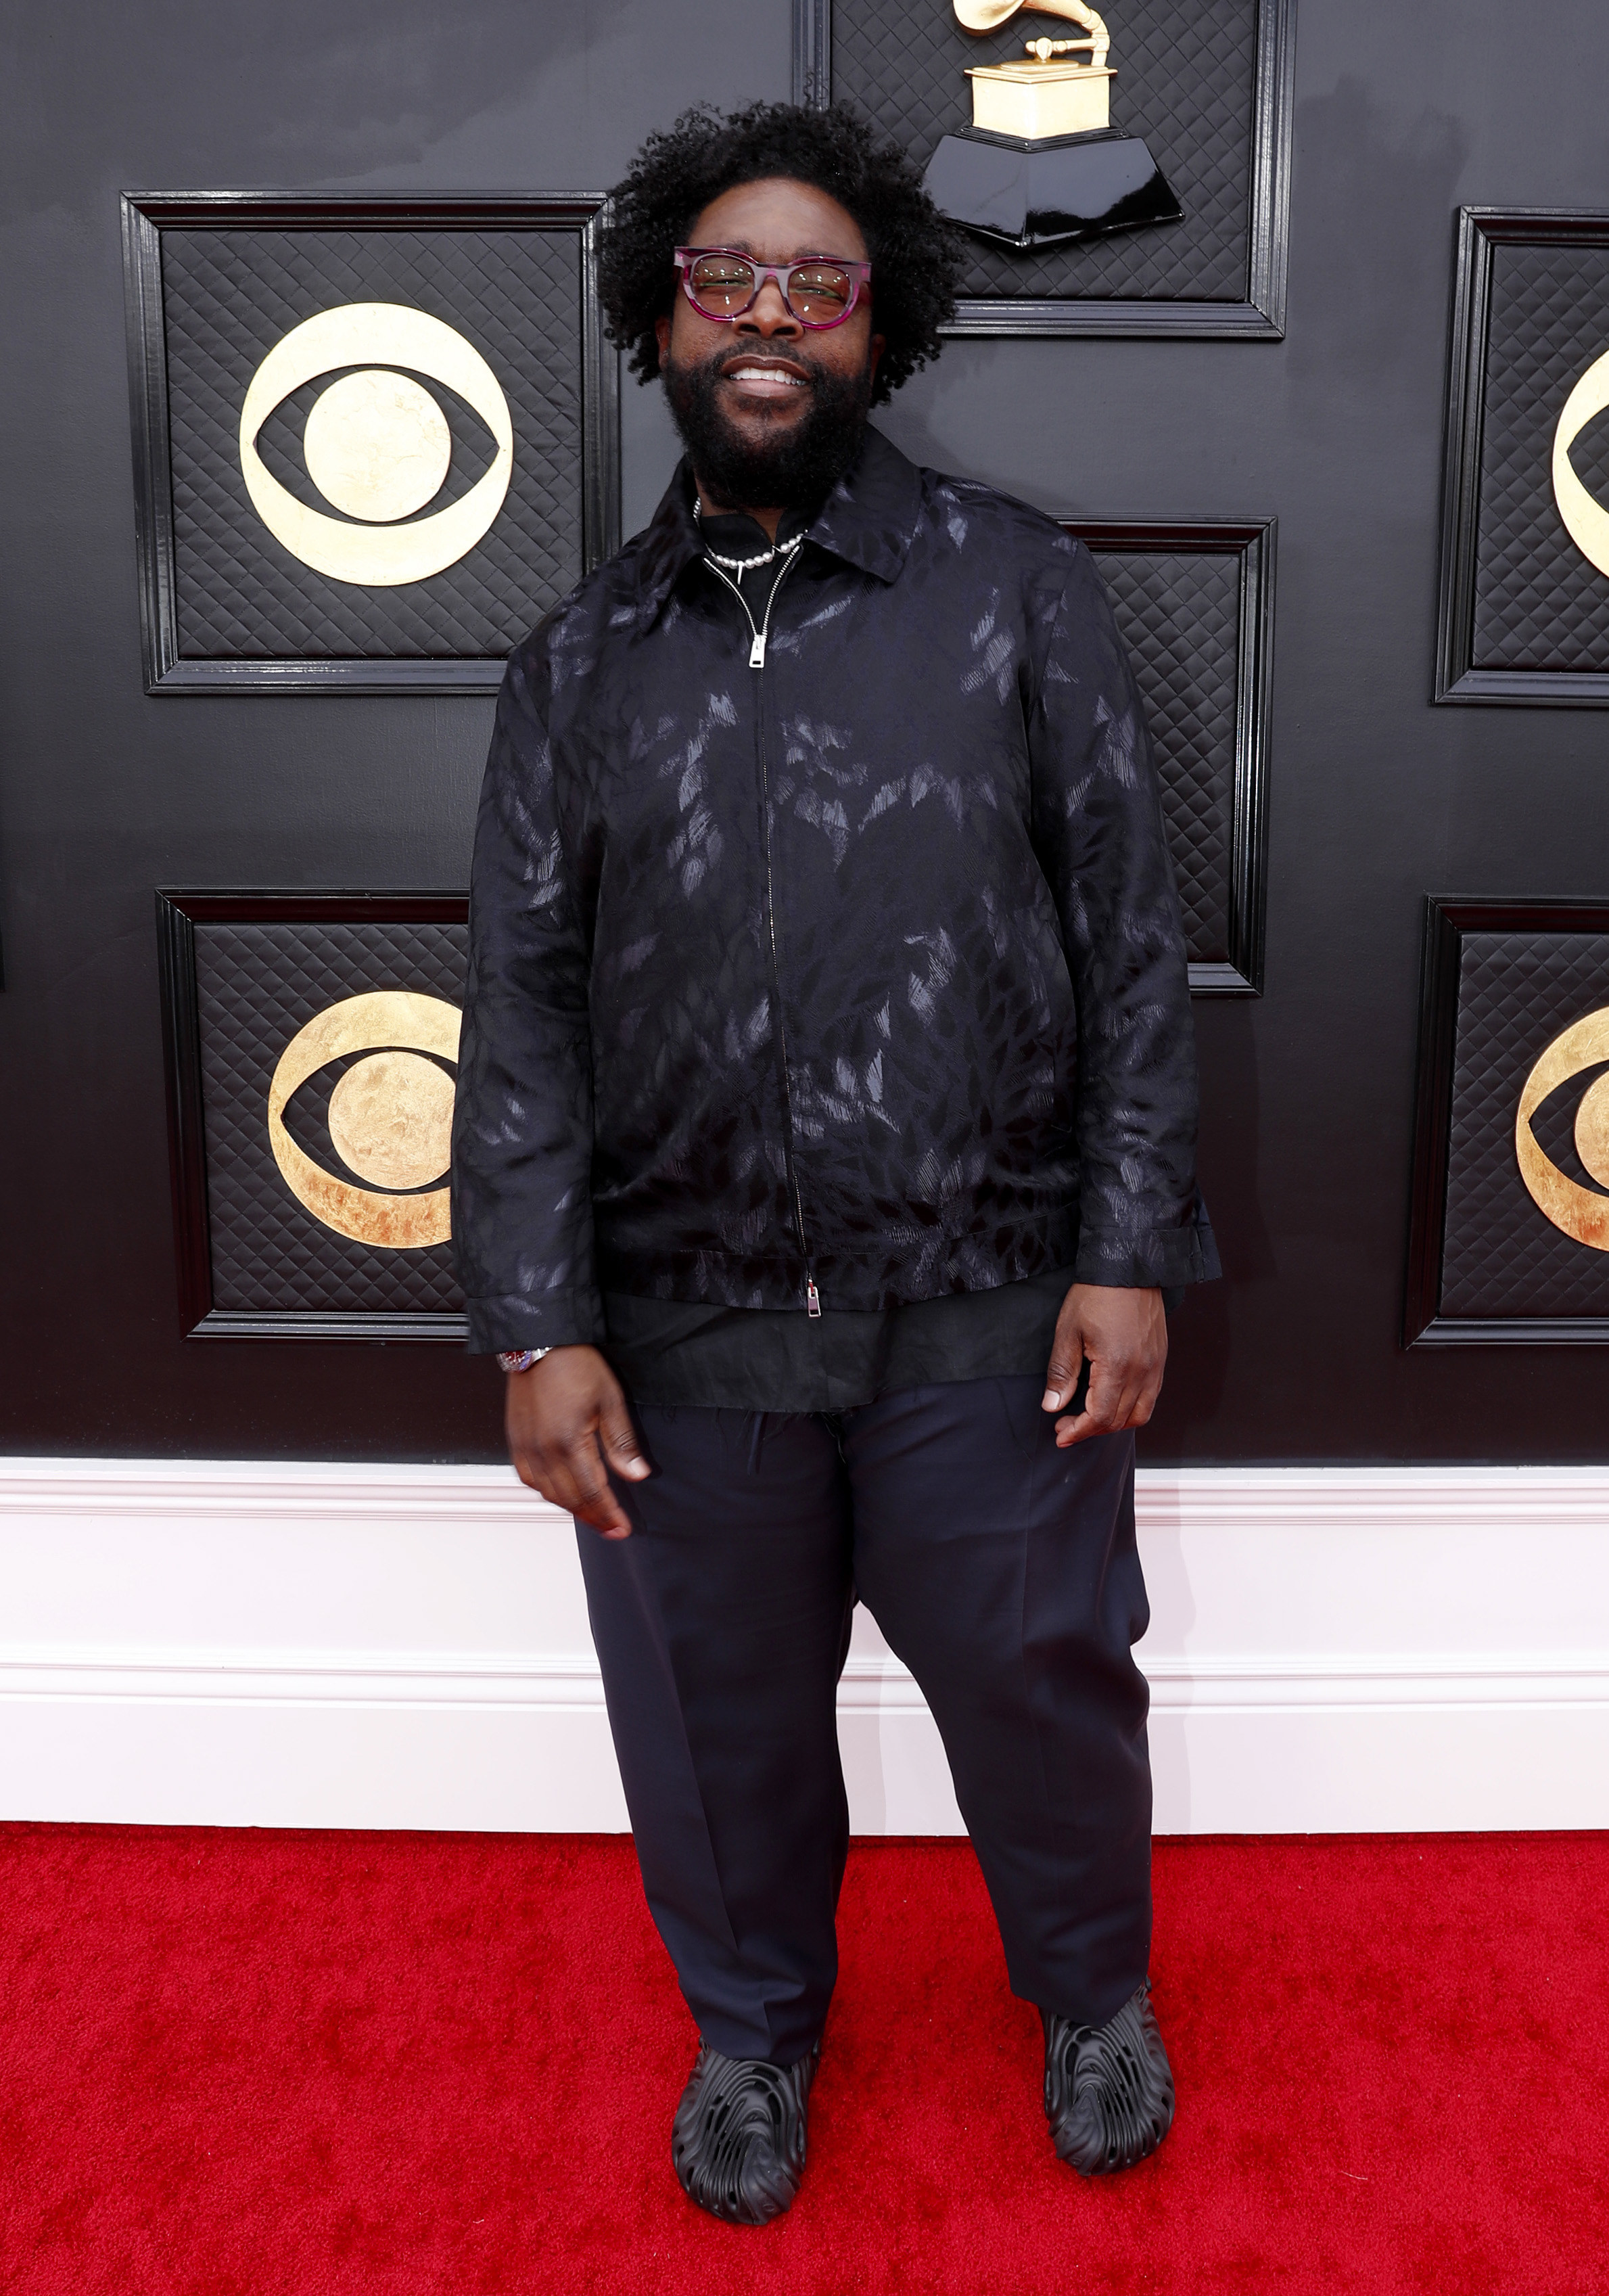 Questlove smiles at the Grammys red carpet